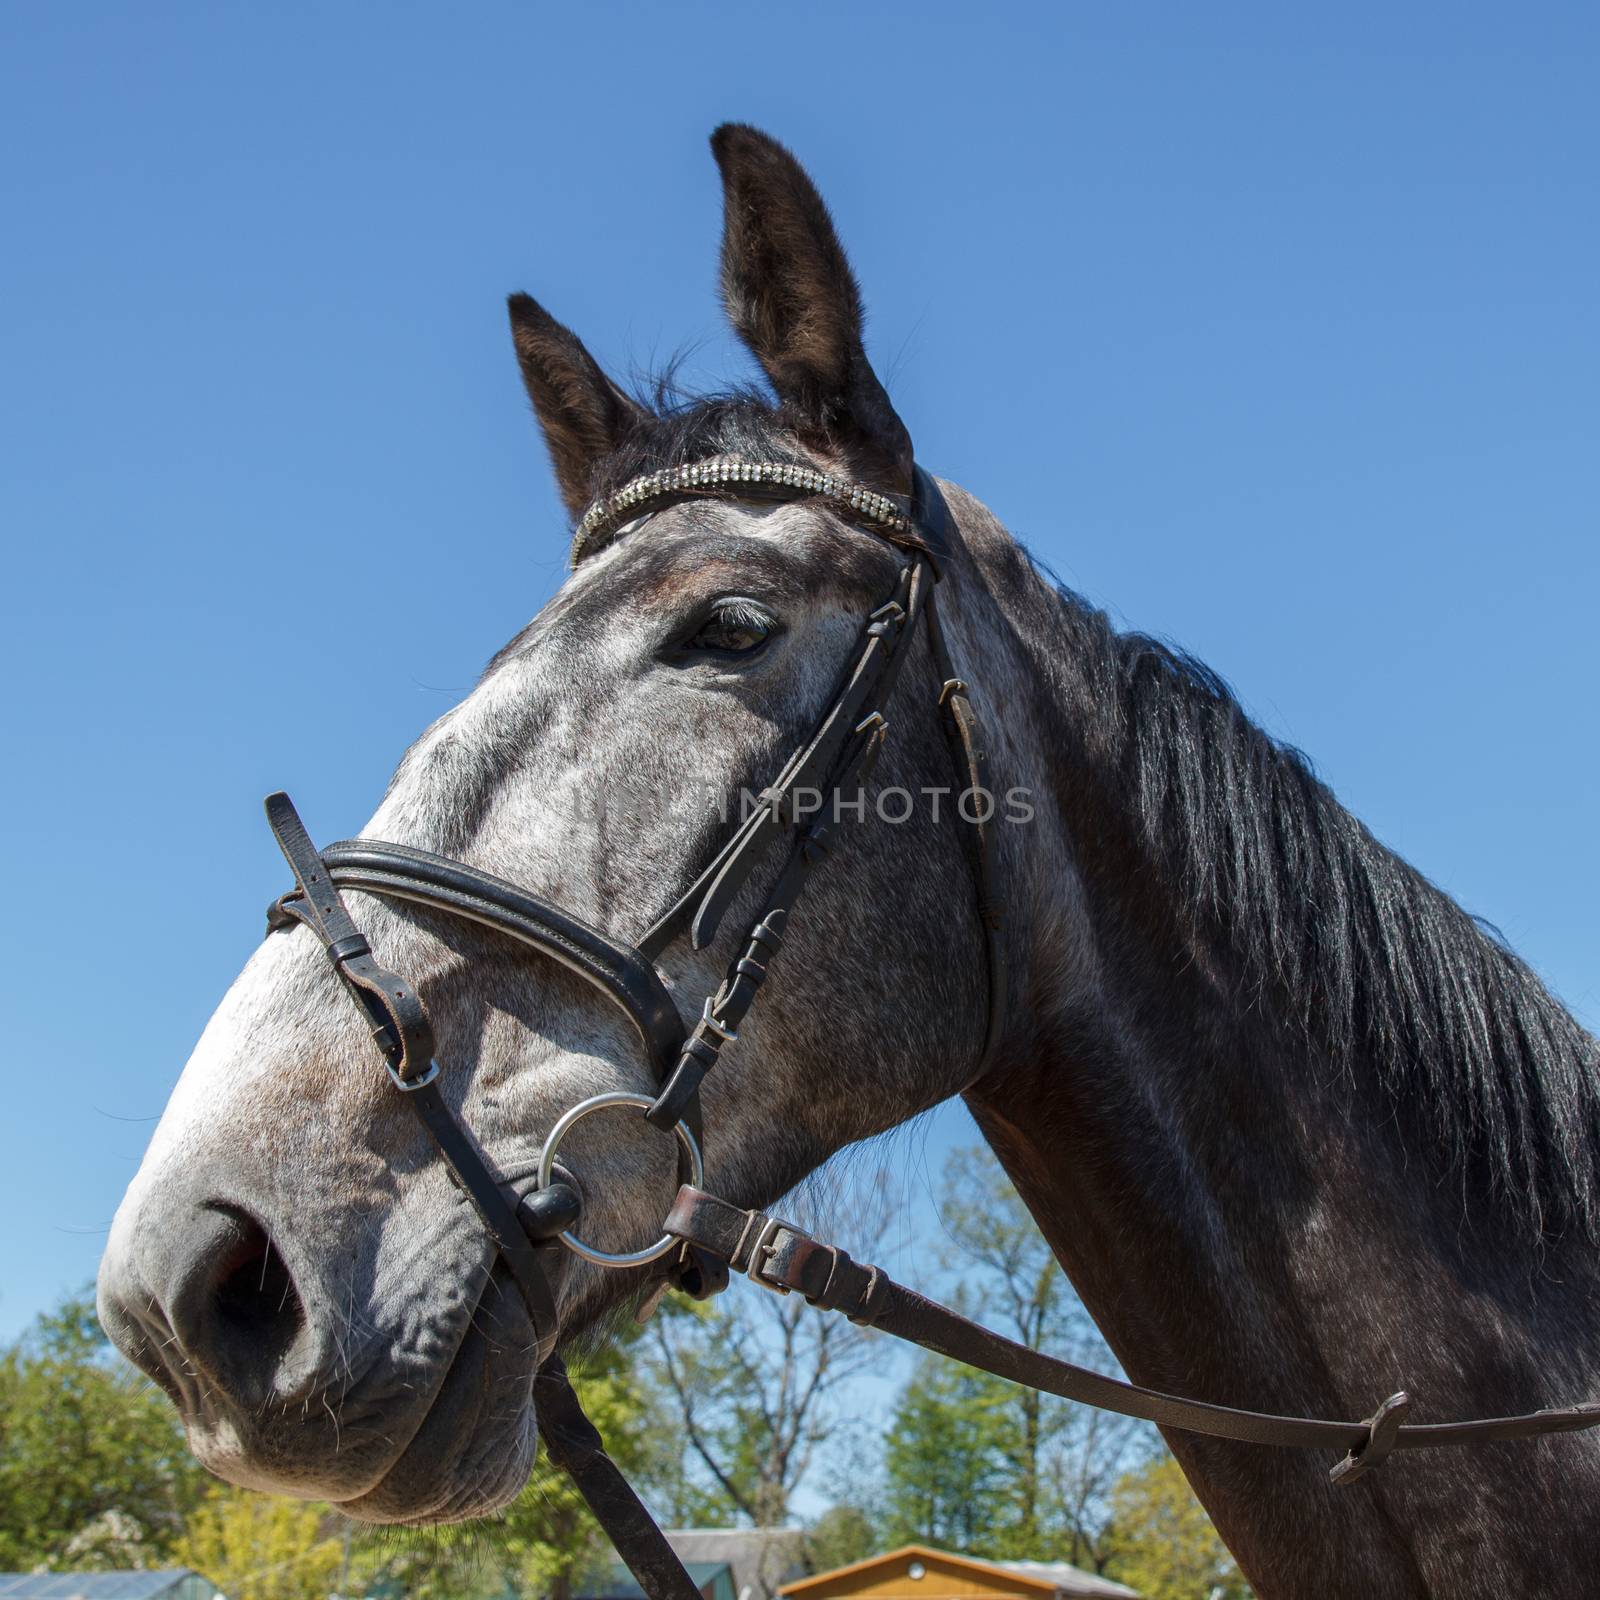 A gray tamed horse with dark eyes against blue sky